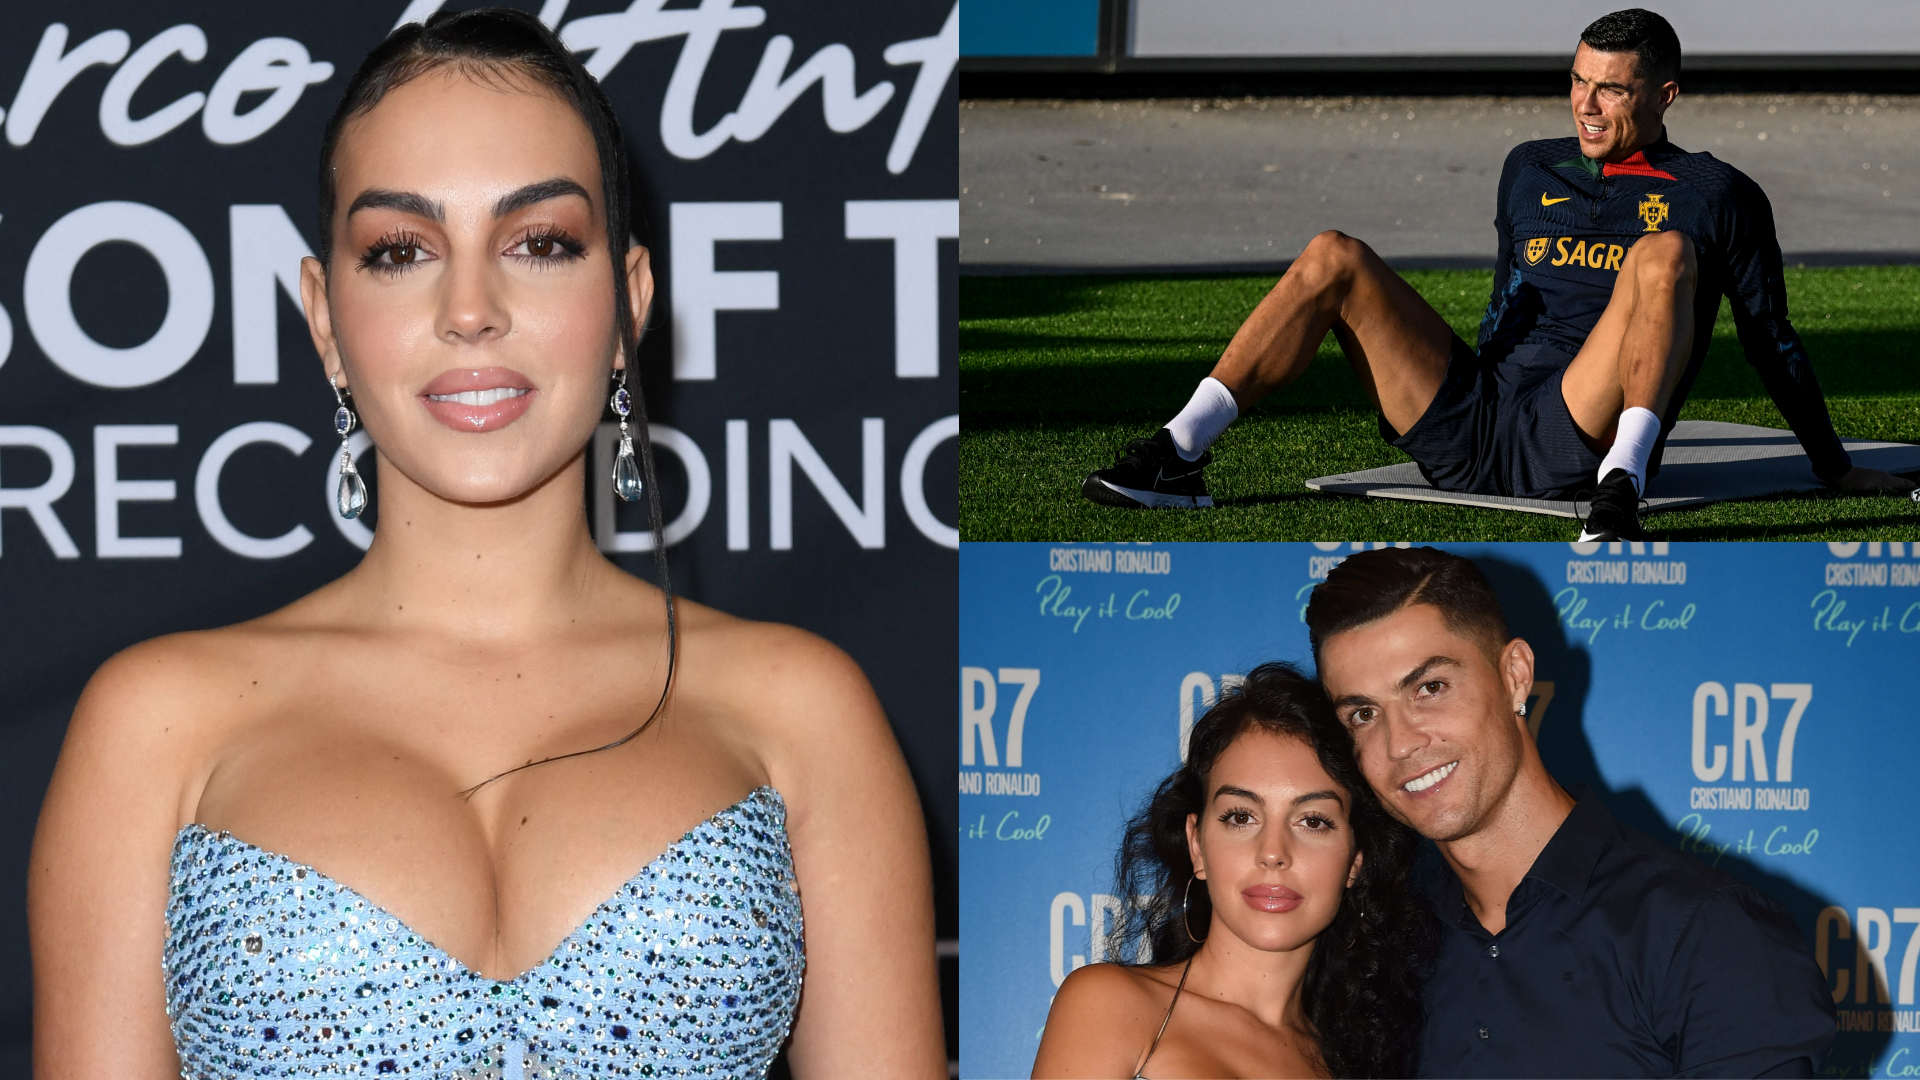 ‘You invited him’ - Cristiano Ronaldo’s girlfriend Georgina Rodriquez gives blunt response to rumours their relationship is on the rocks - and hints at potential wedding